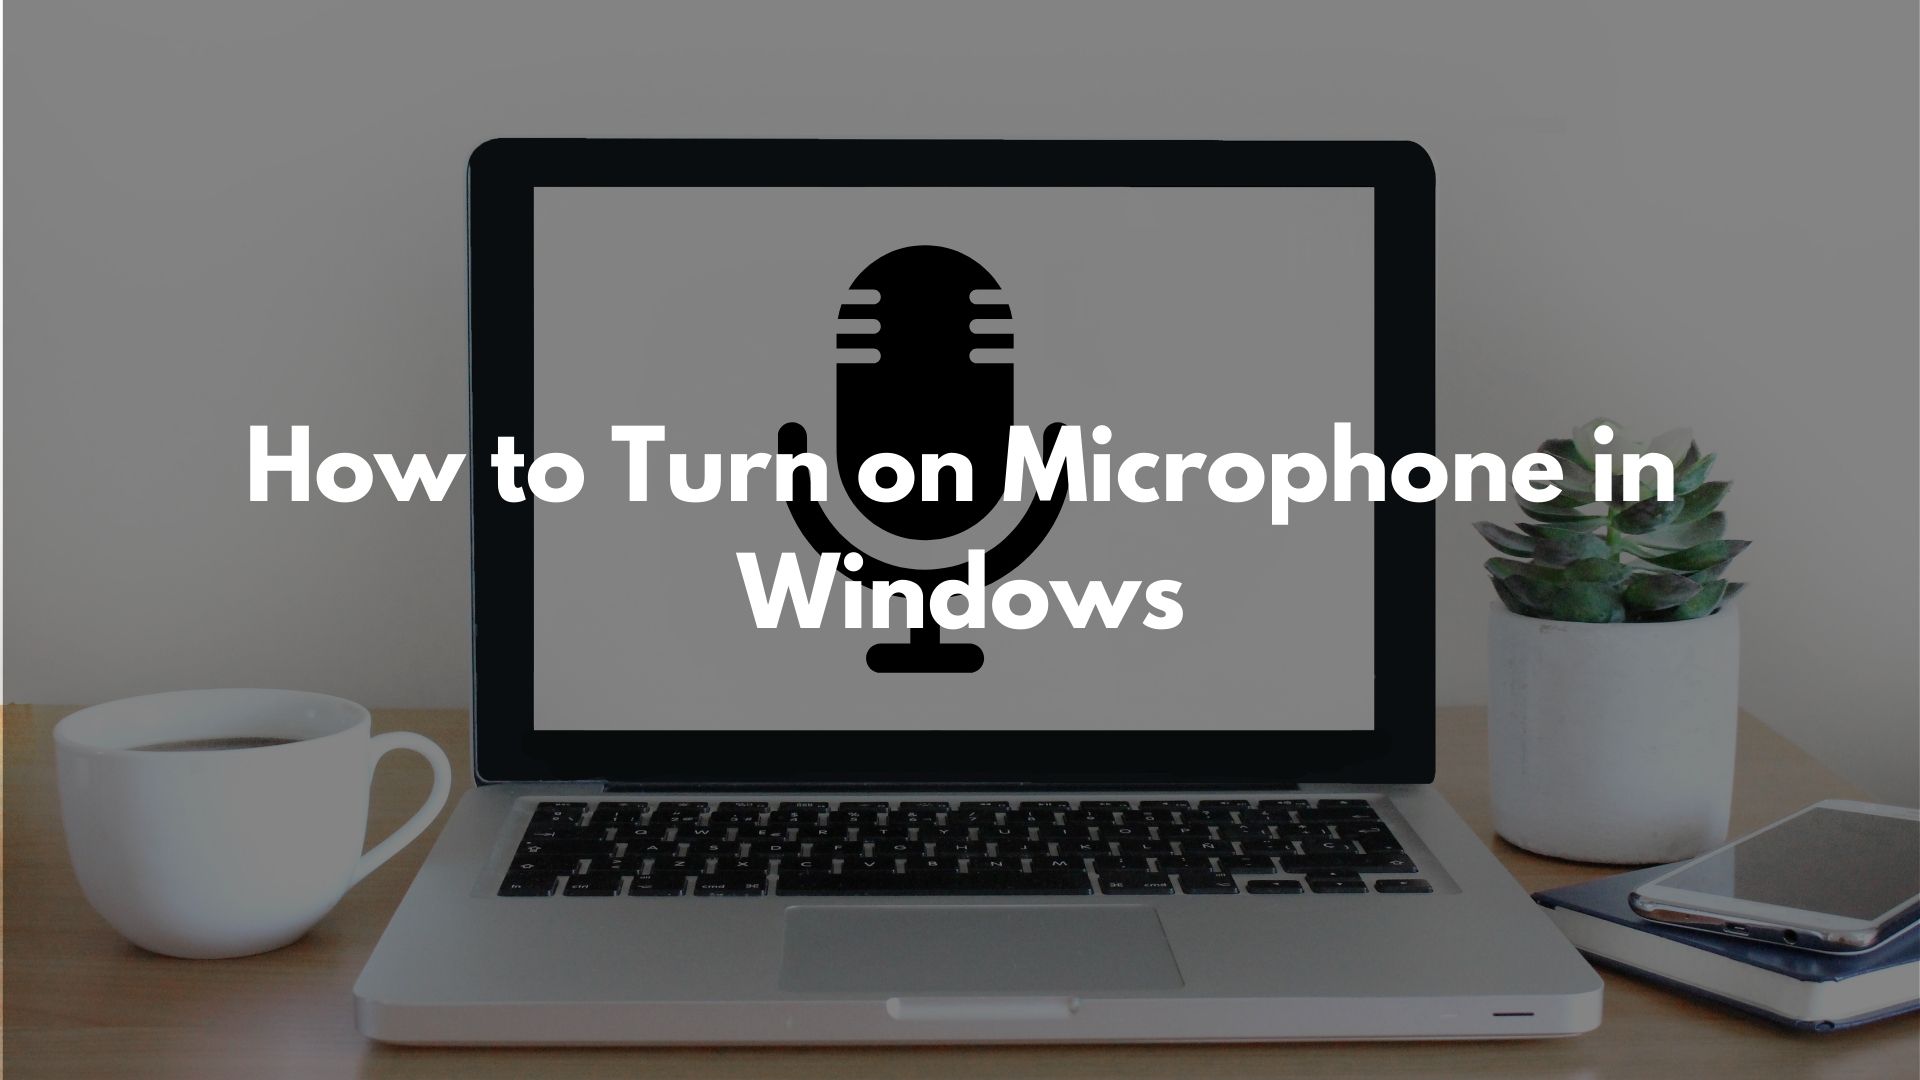 How to Turn on Microphone in Windows